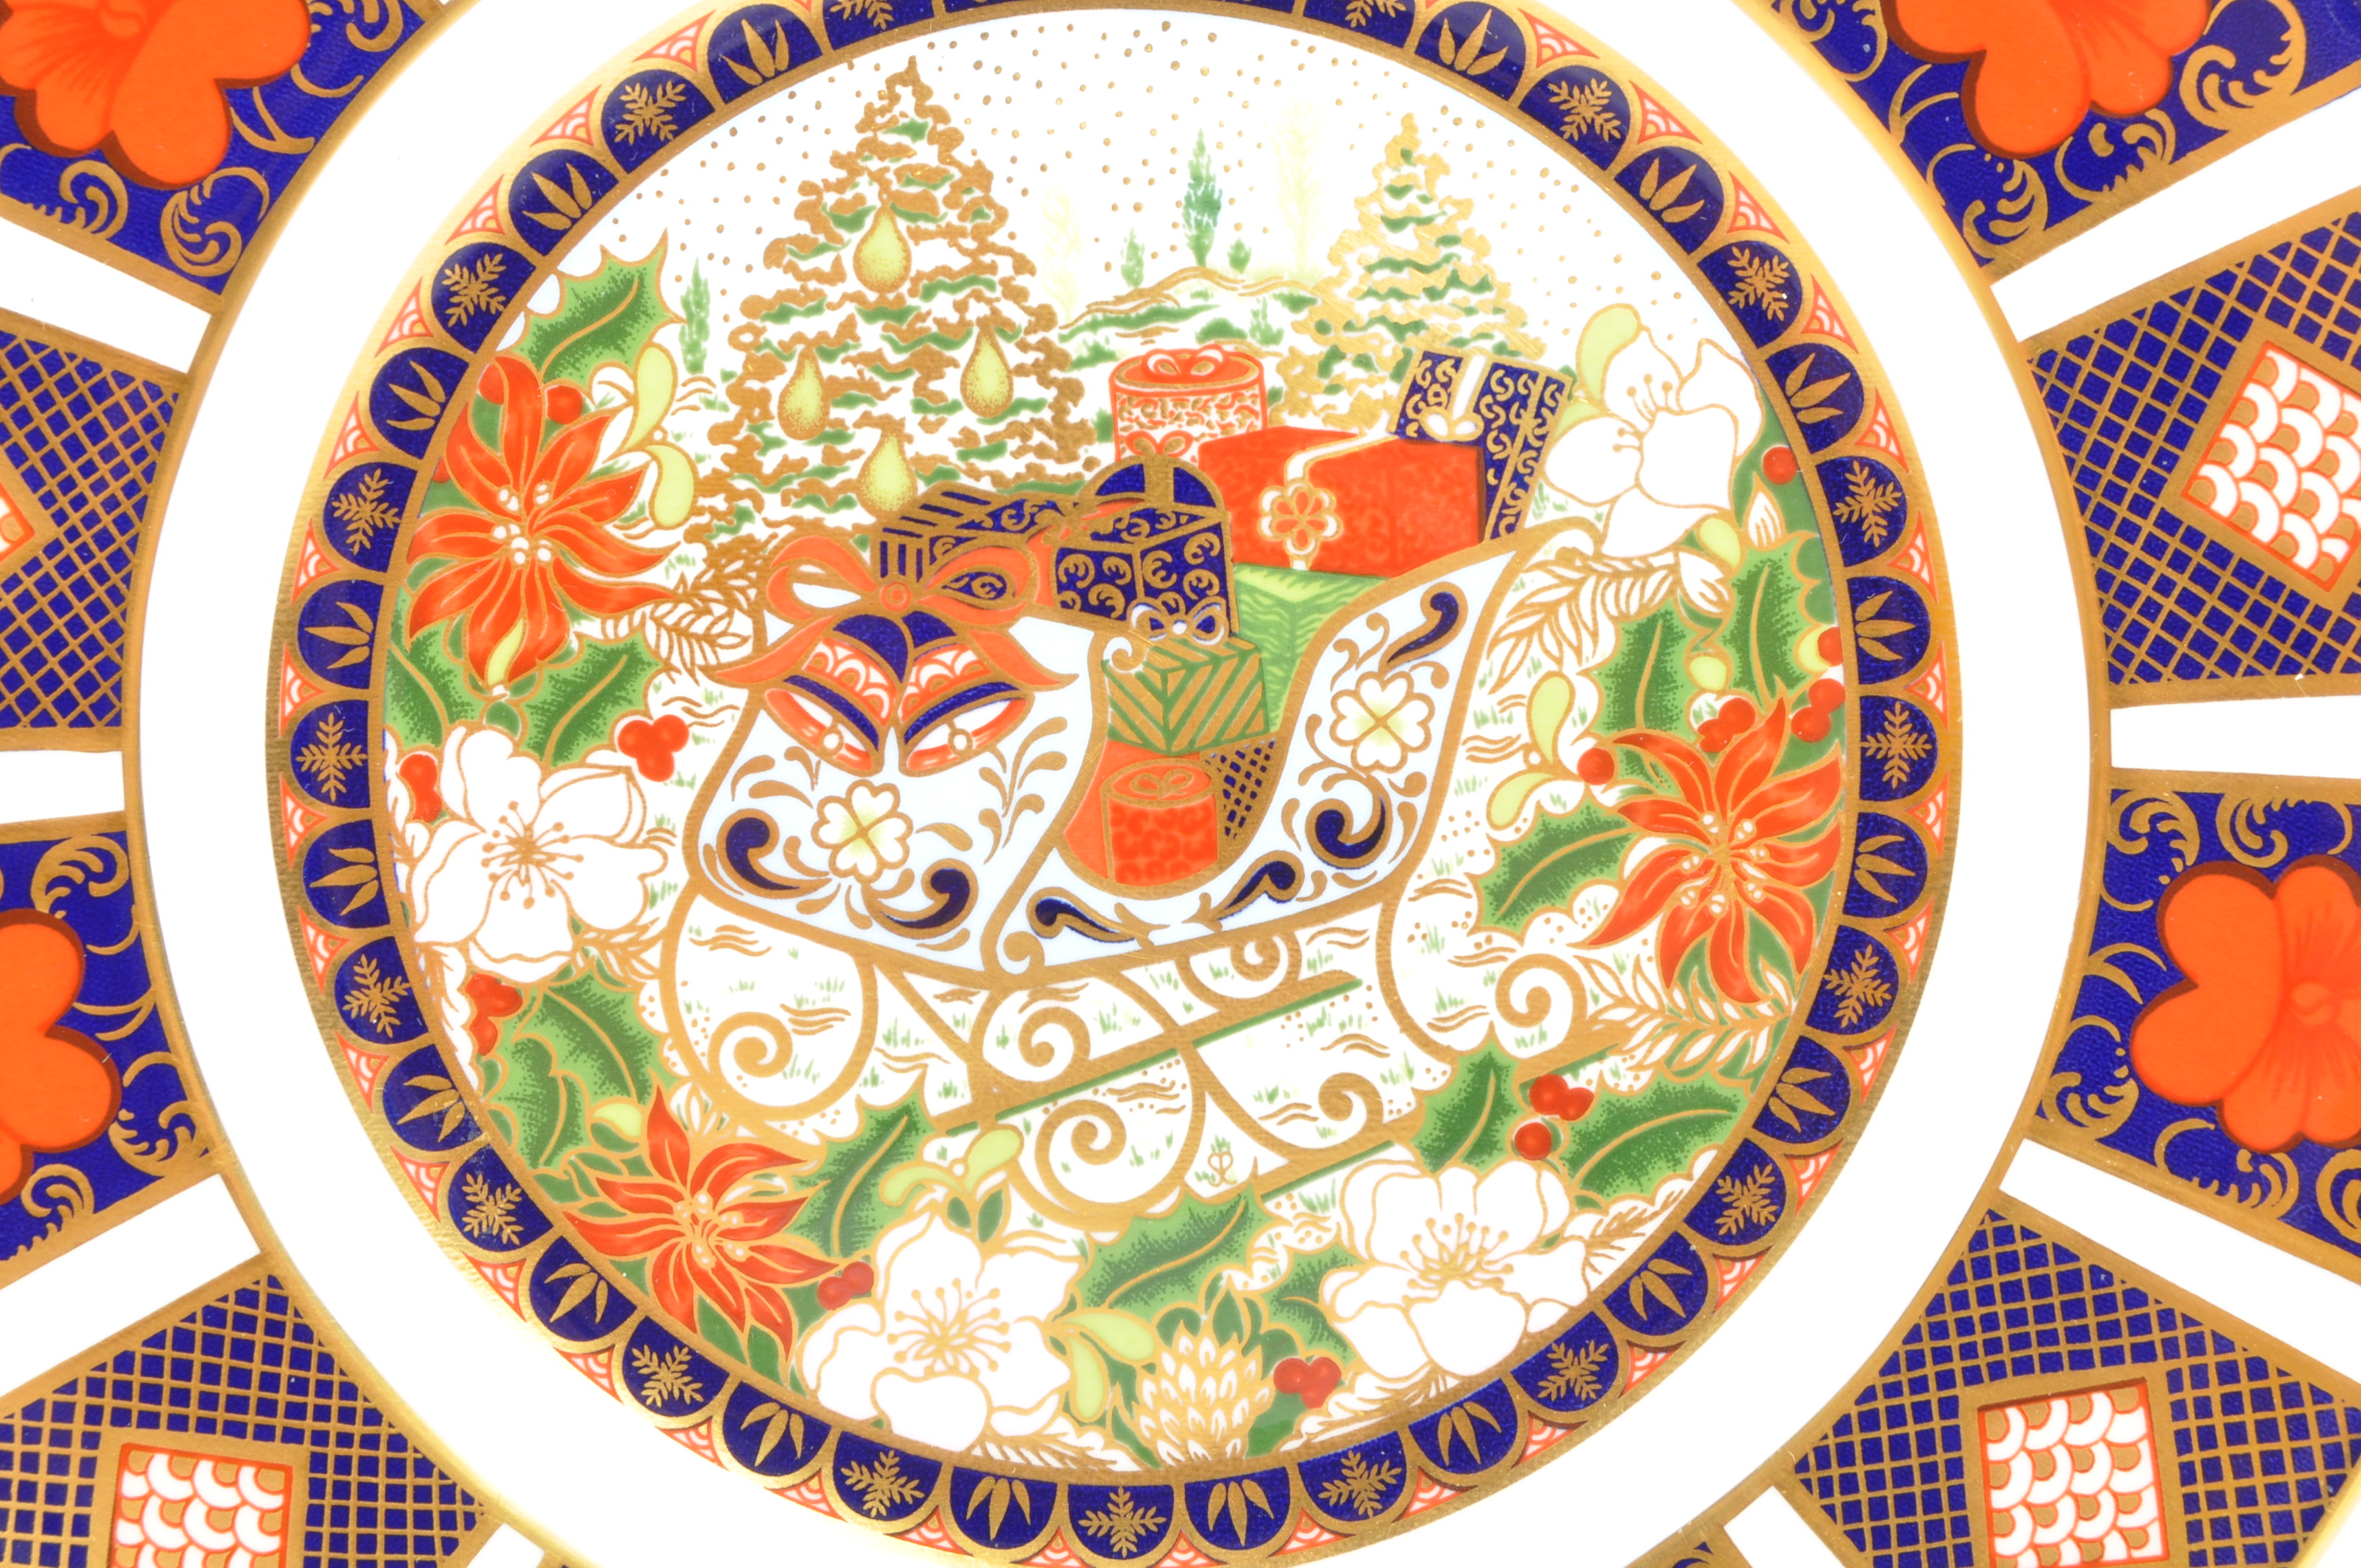 A COLLECTION OF ROYAL CROWN DERBY IMARI PLATES - Image 7 of 11